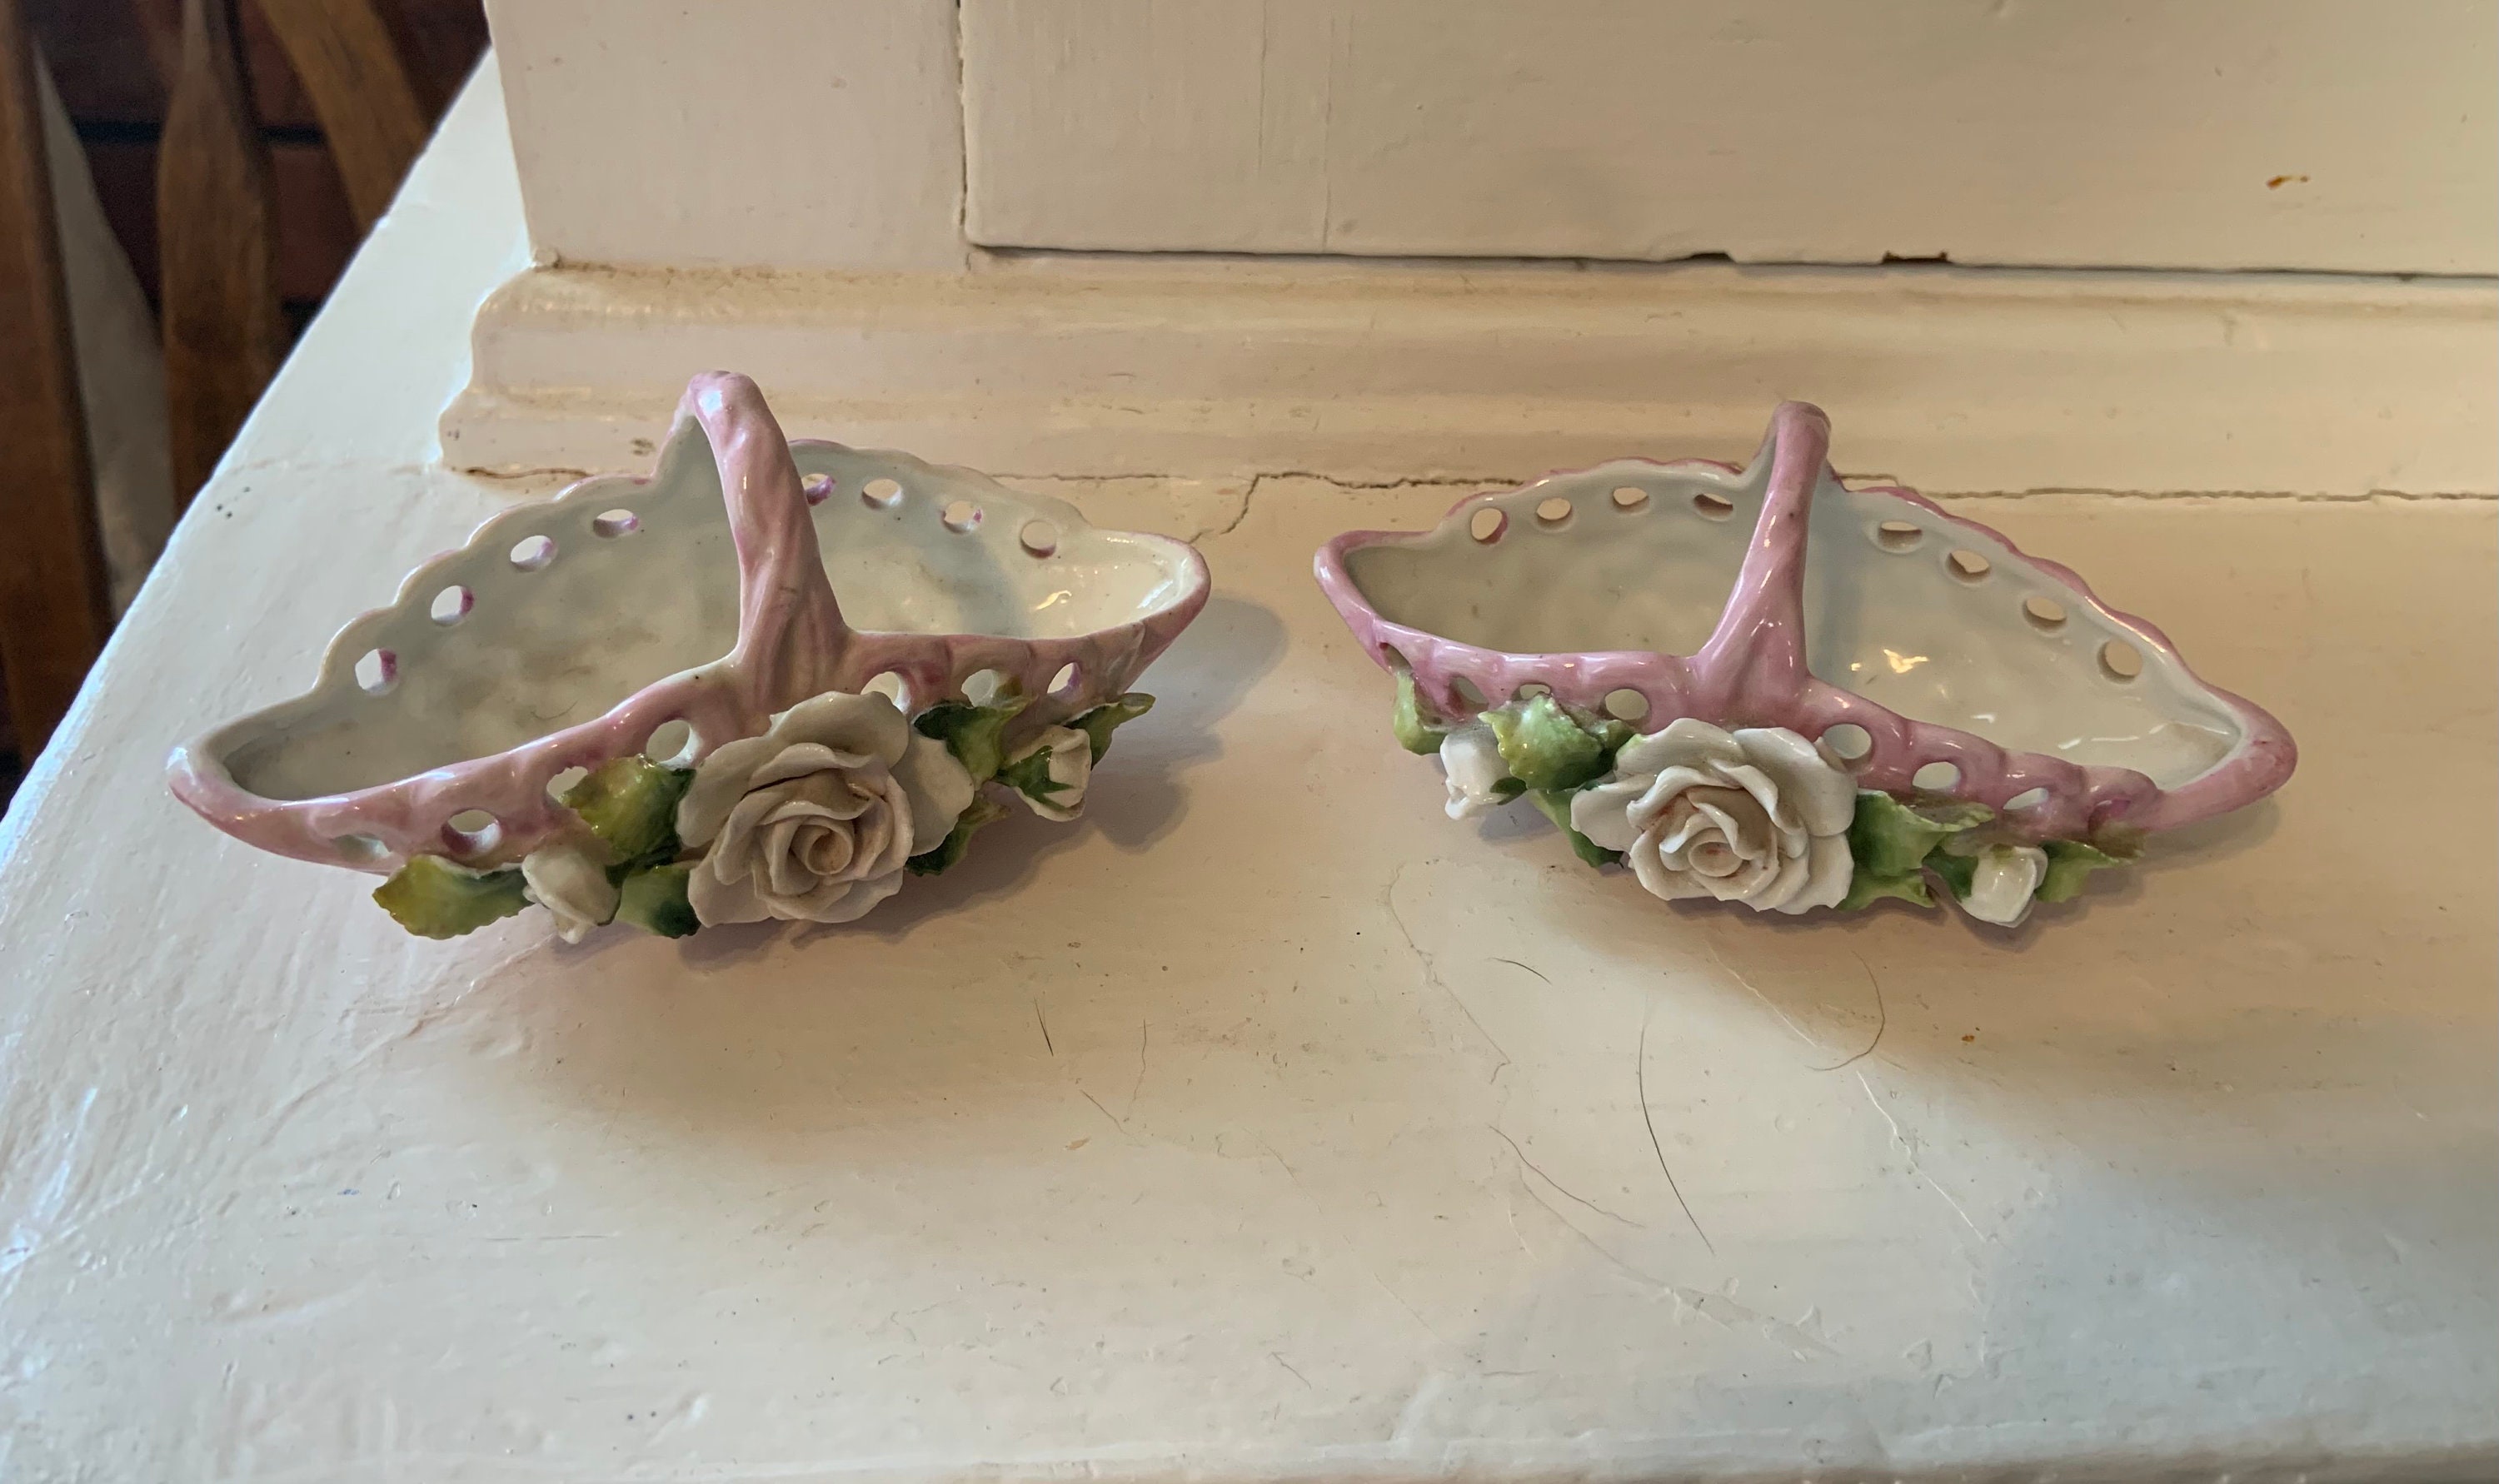 Pair of Miniature Pink Porcelain Baskets Featuring Delicate | Etsy